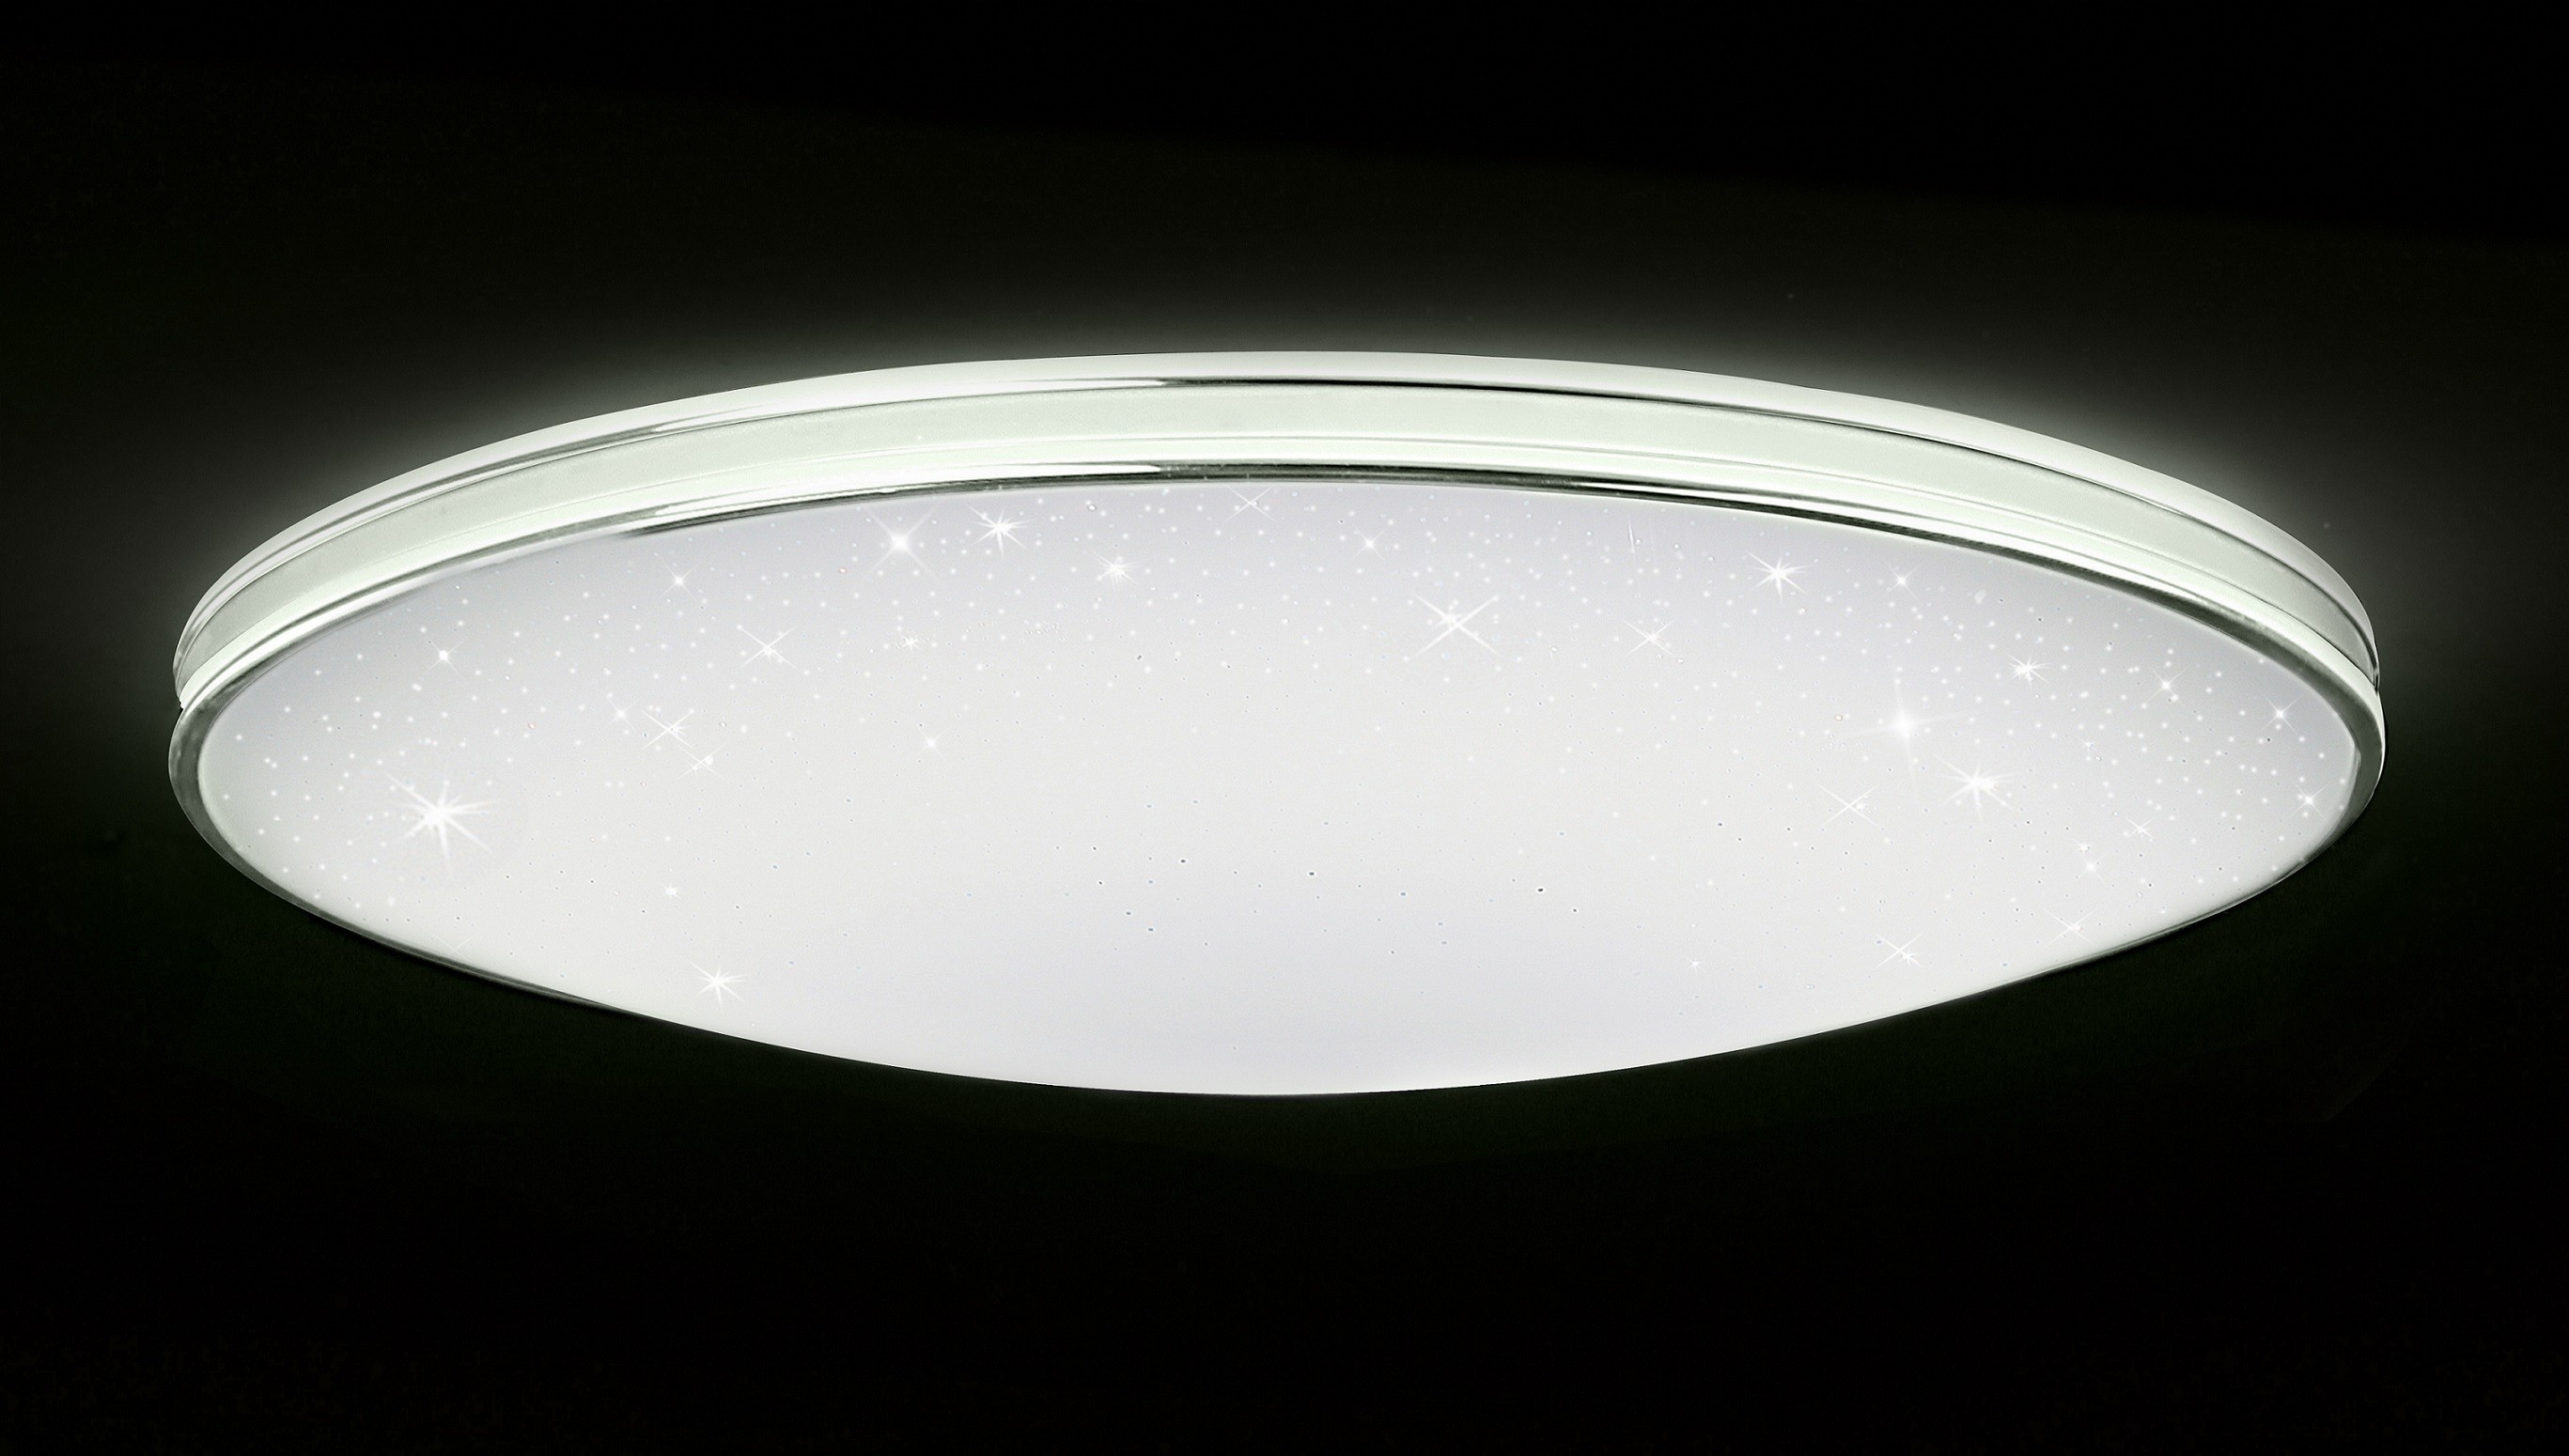 Dual Control Large LED Ceiling Lights φ530mm×120mm Eye Protection With High Power Factor